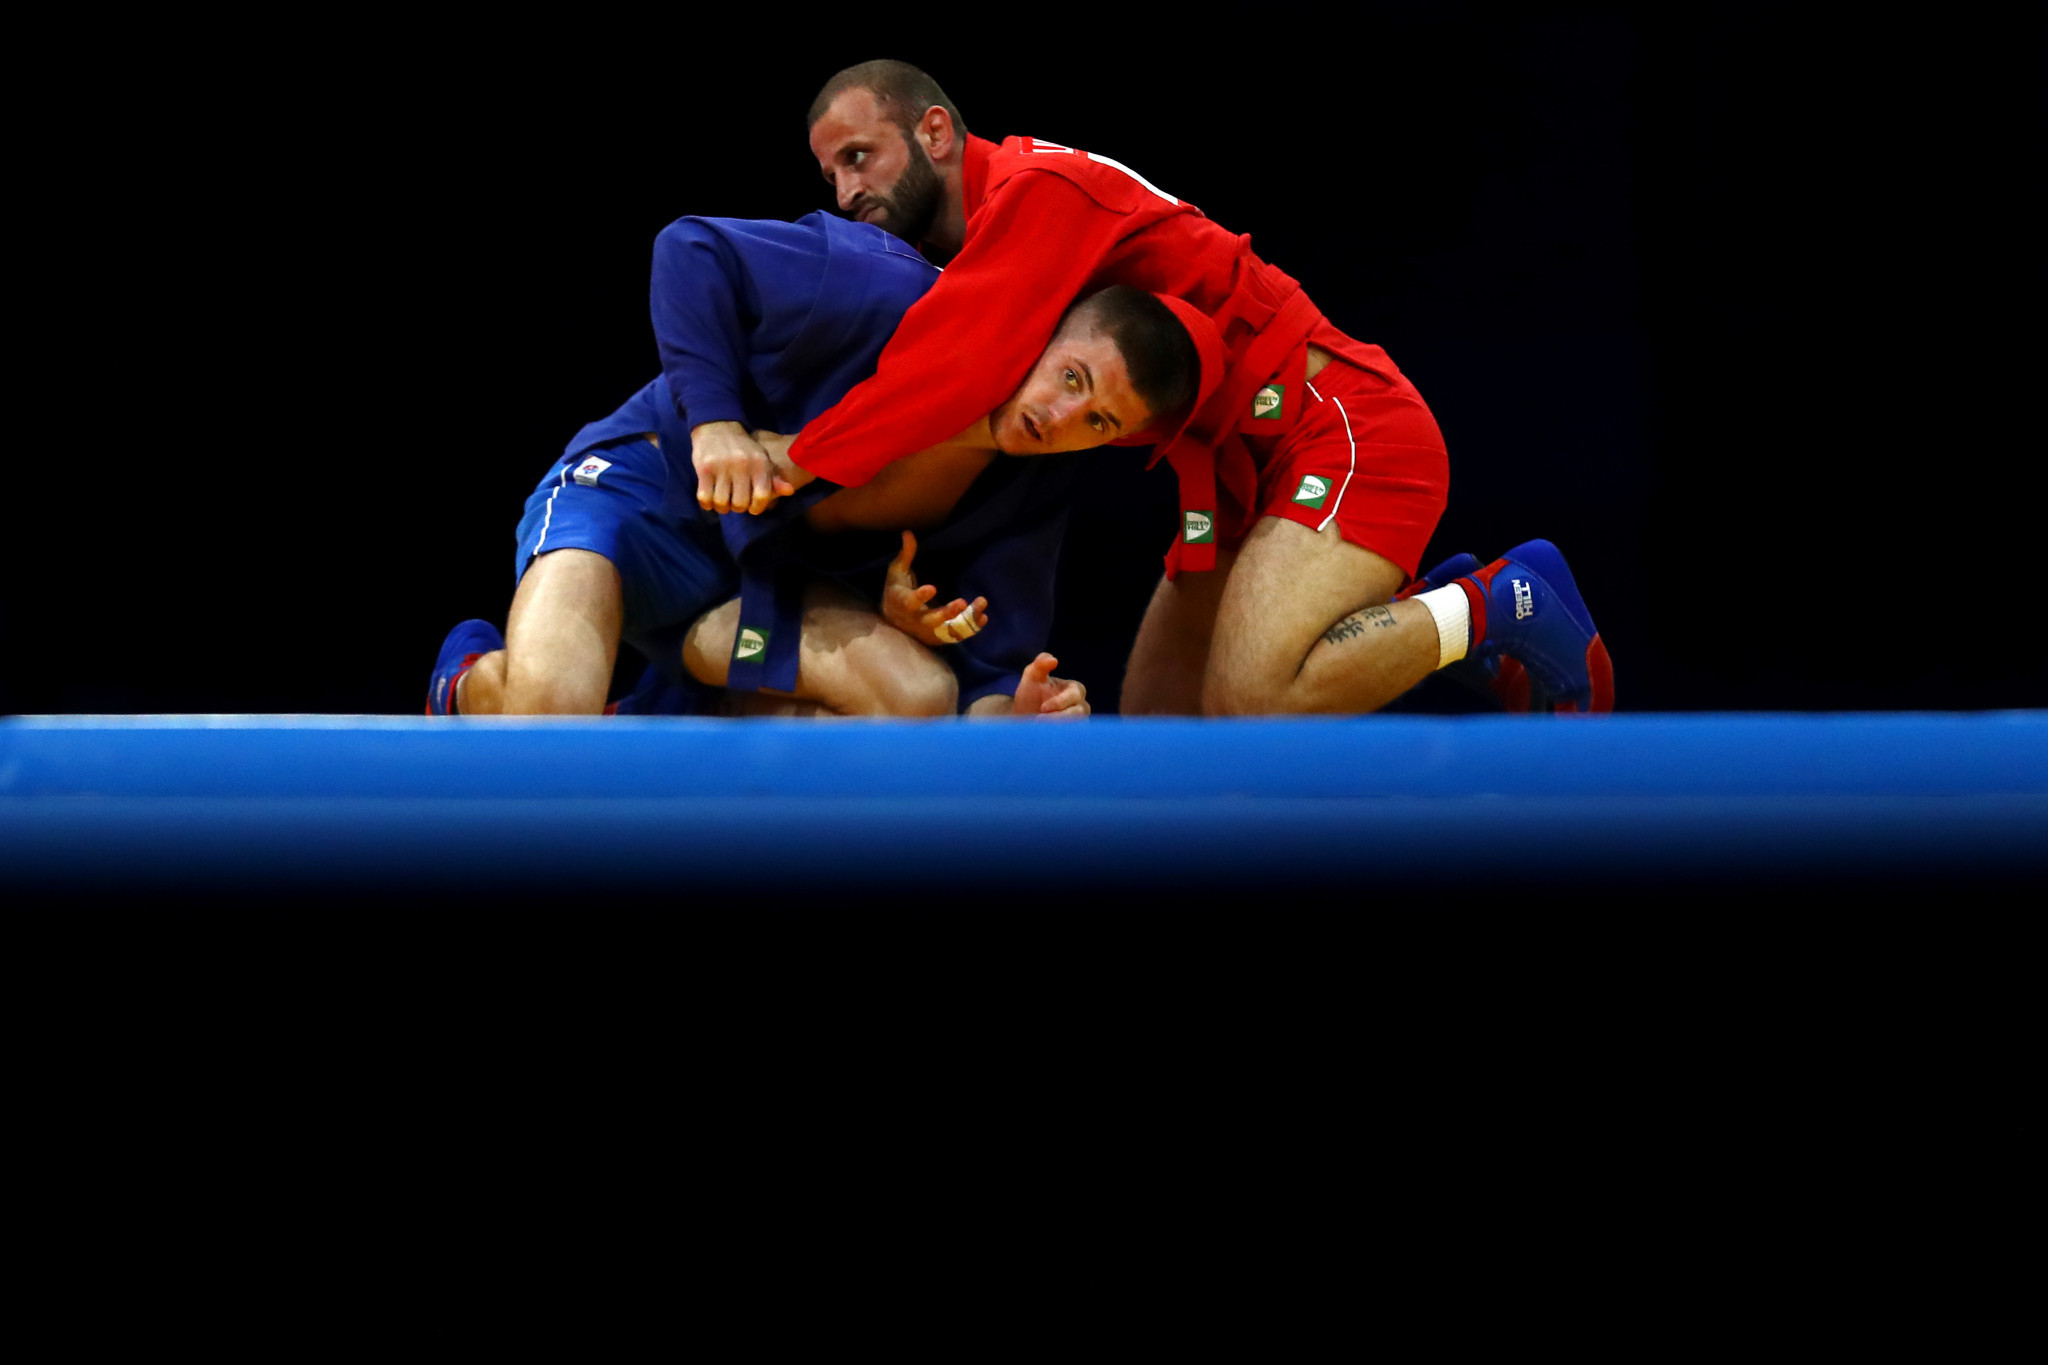 Sambo also began, with the medals dominated by Russian athletes ©Getty Images